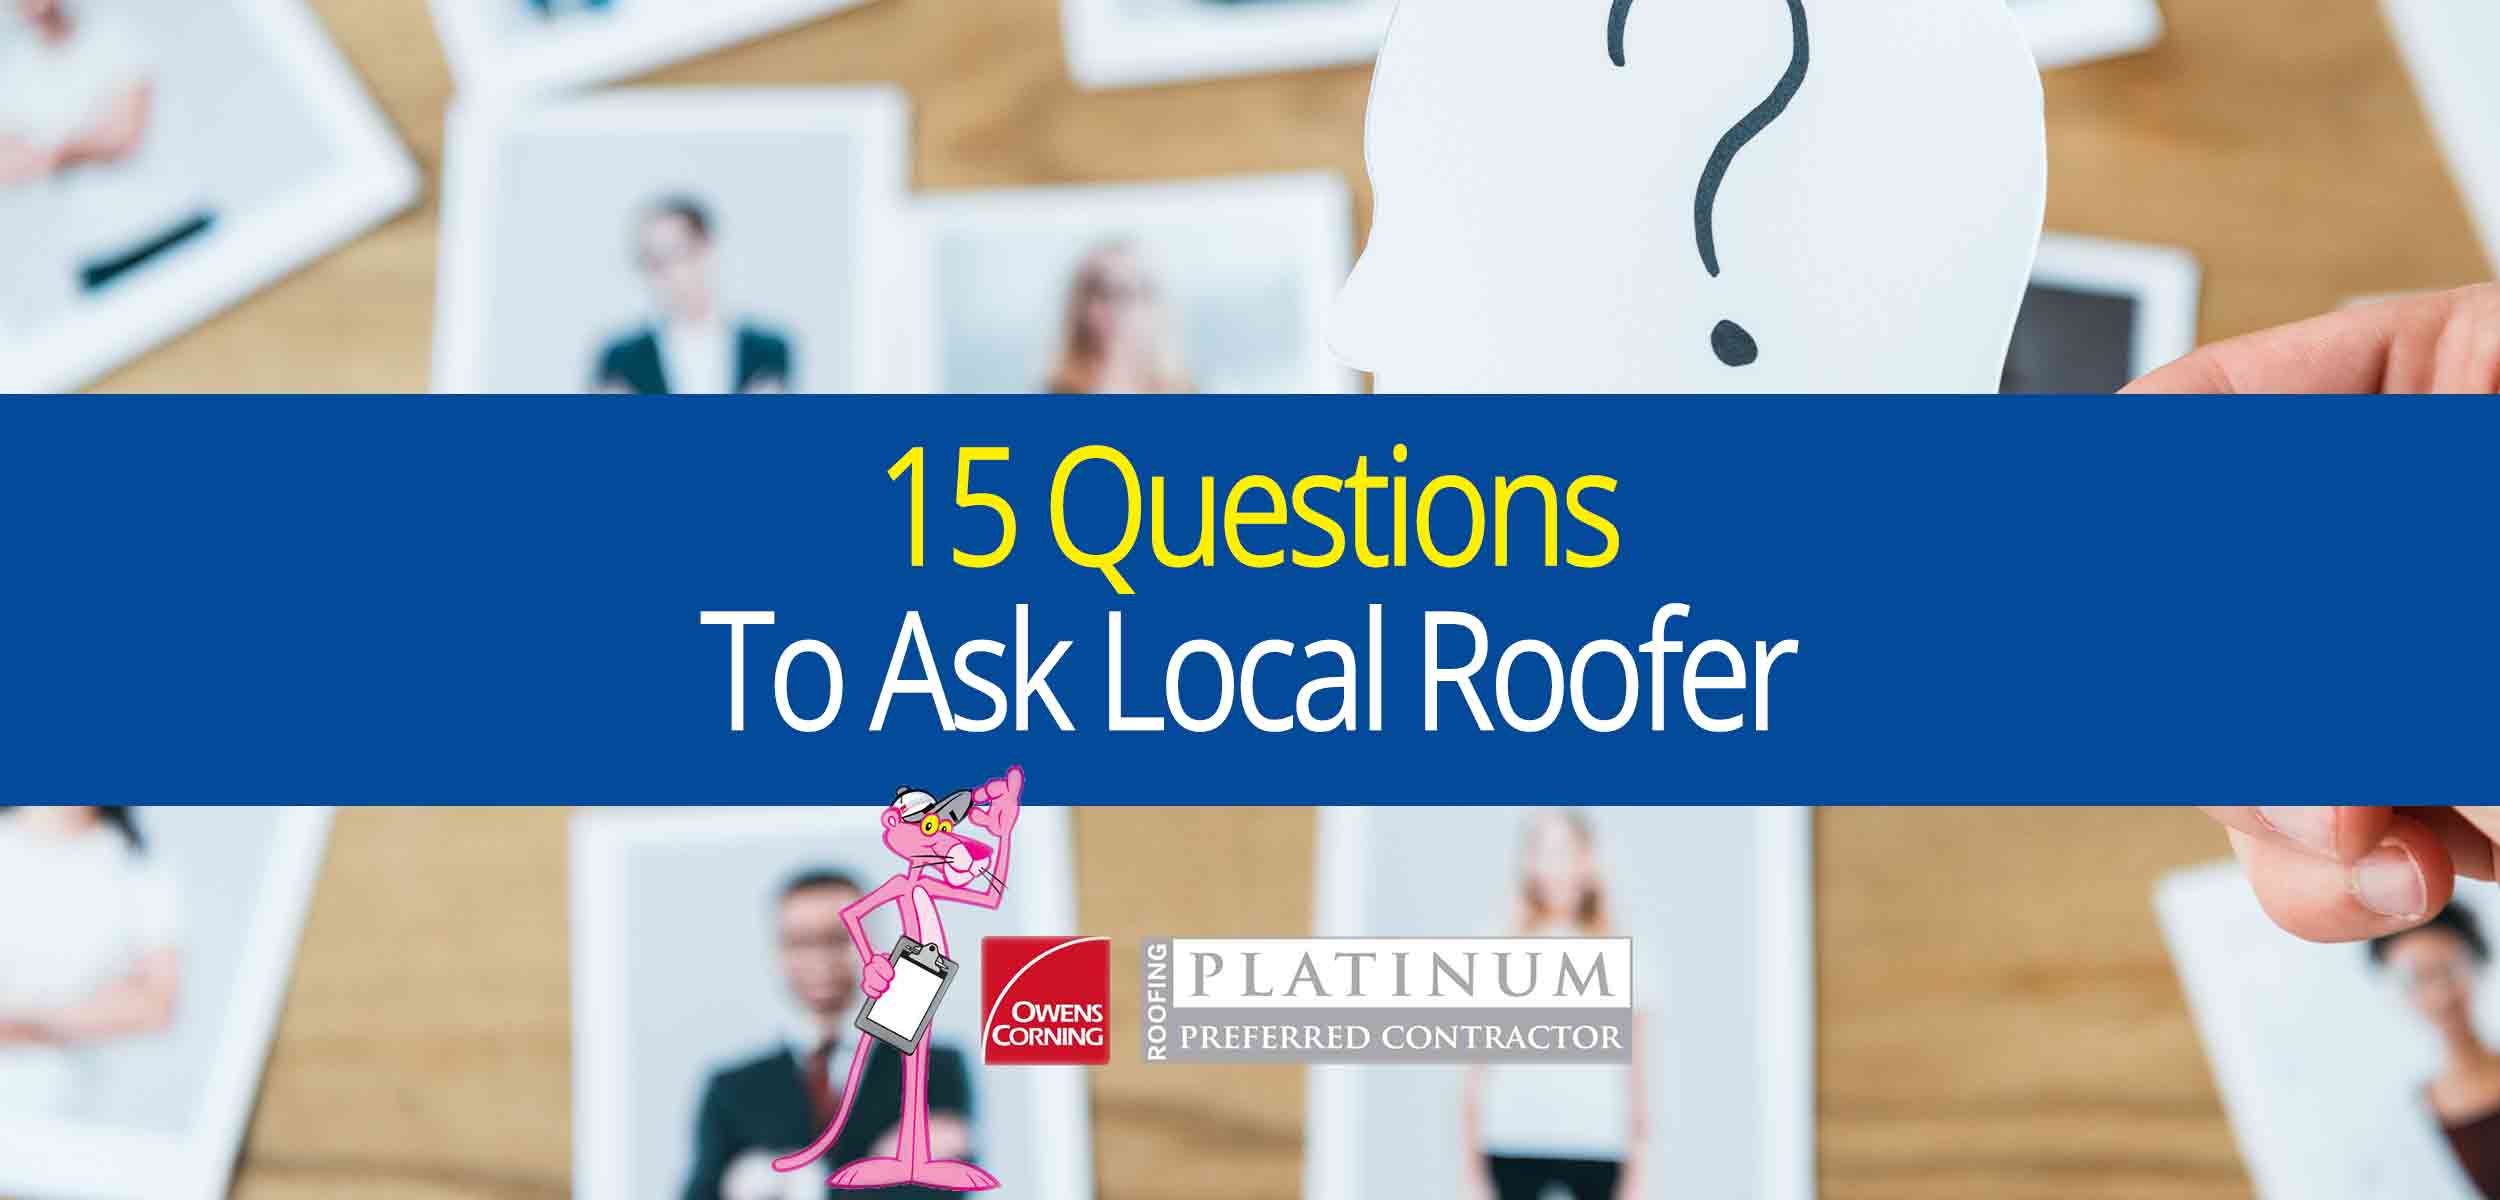 15 Questions to Ask Local Roofer